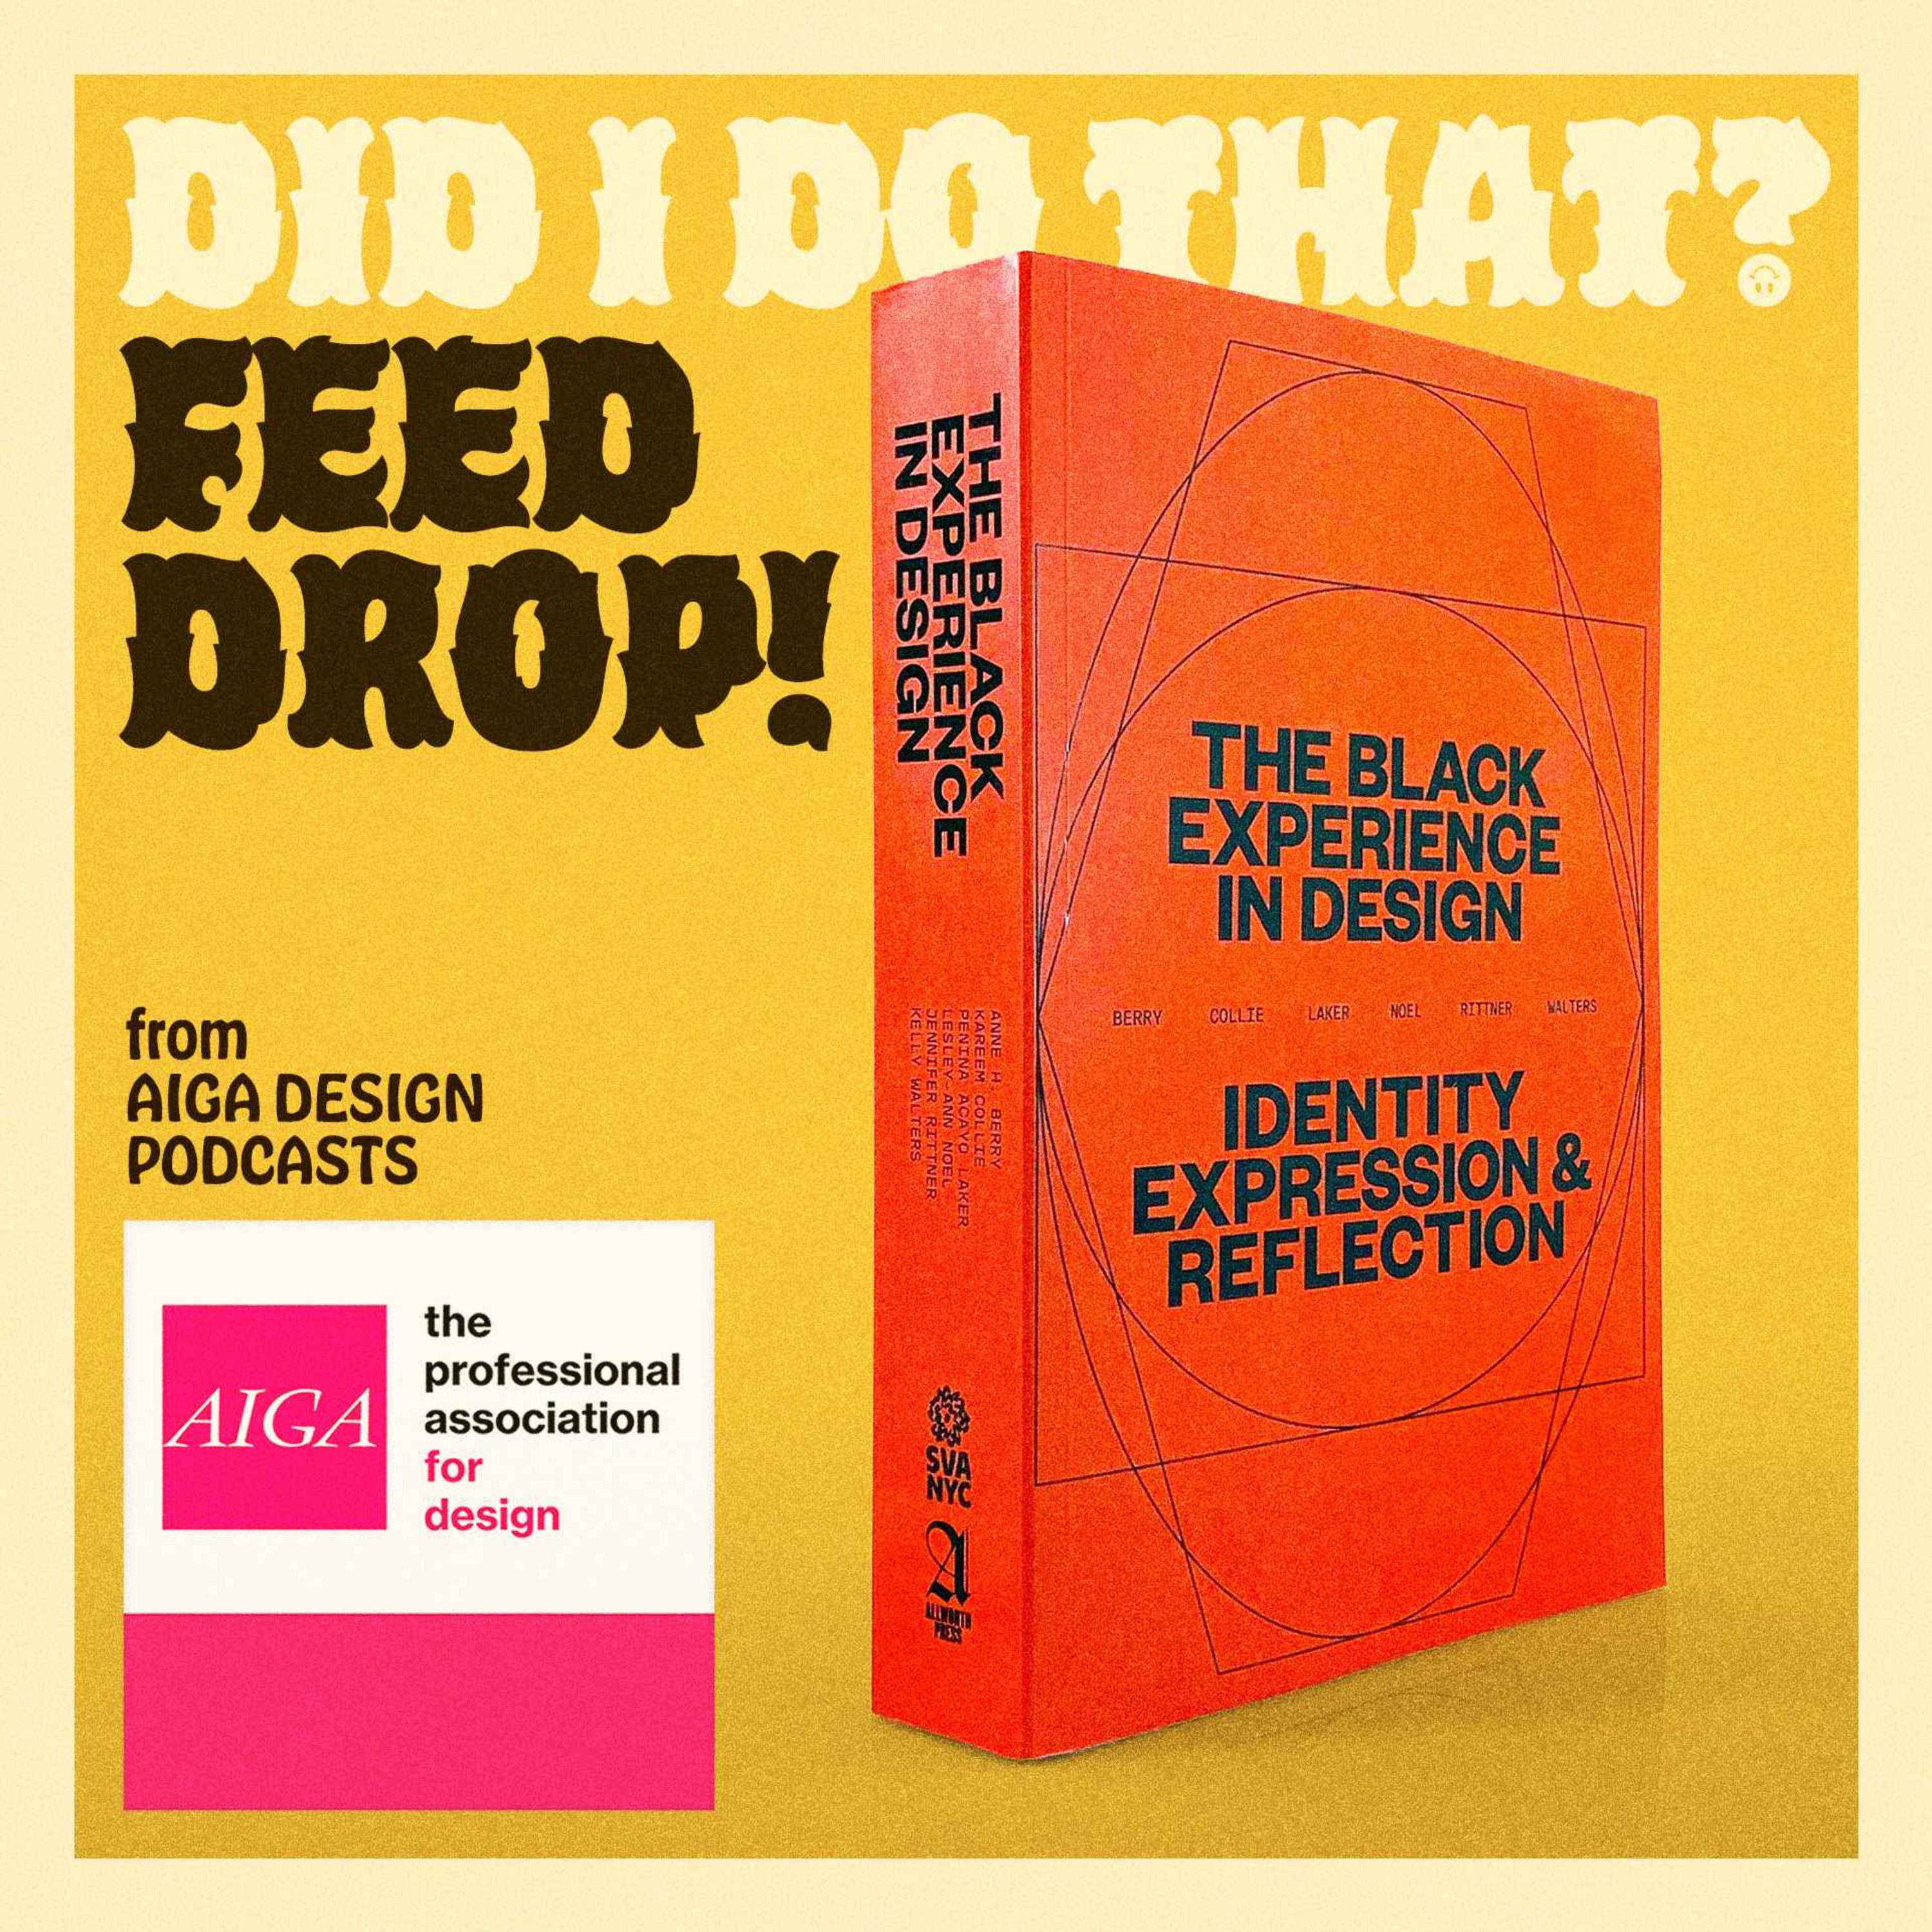 Feed Drop: AIGA Design Podcasts, ”The Black Experience in Design: Identity, Expression, and Reflection”